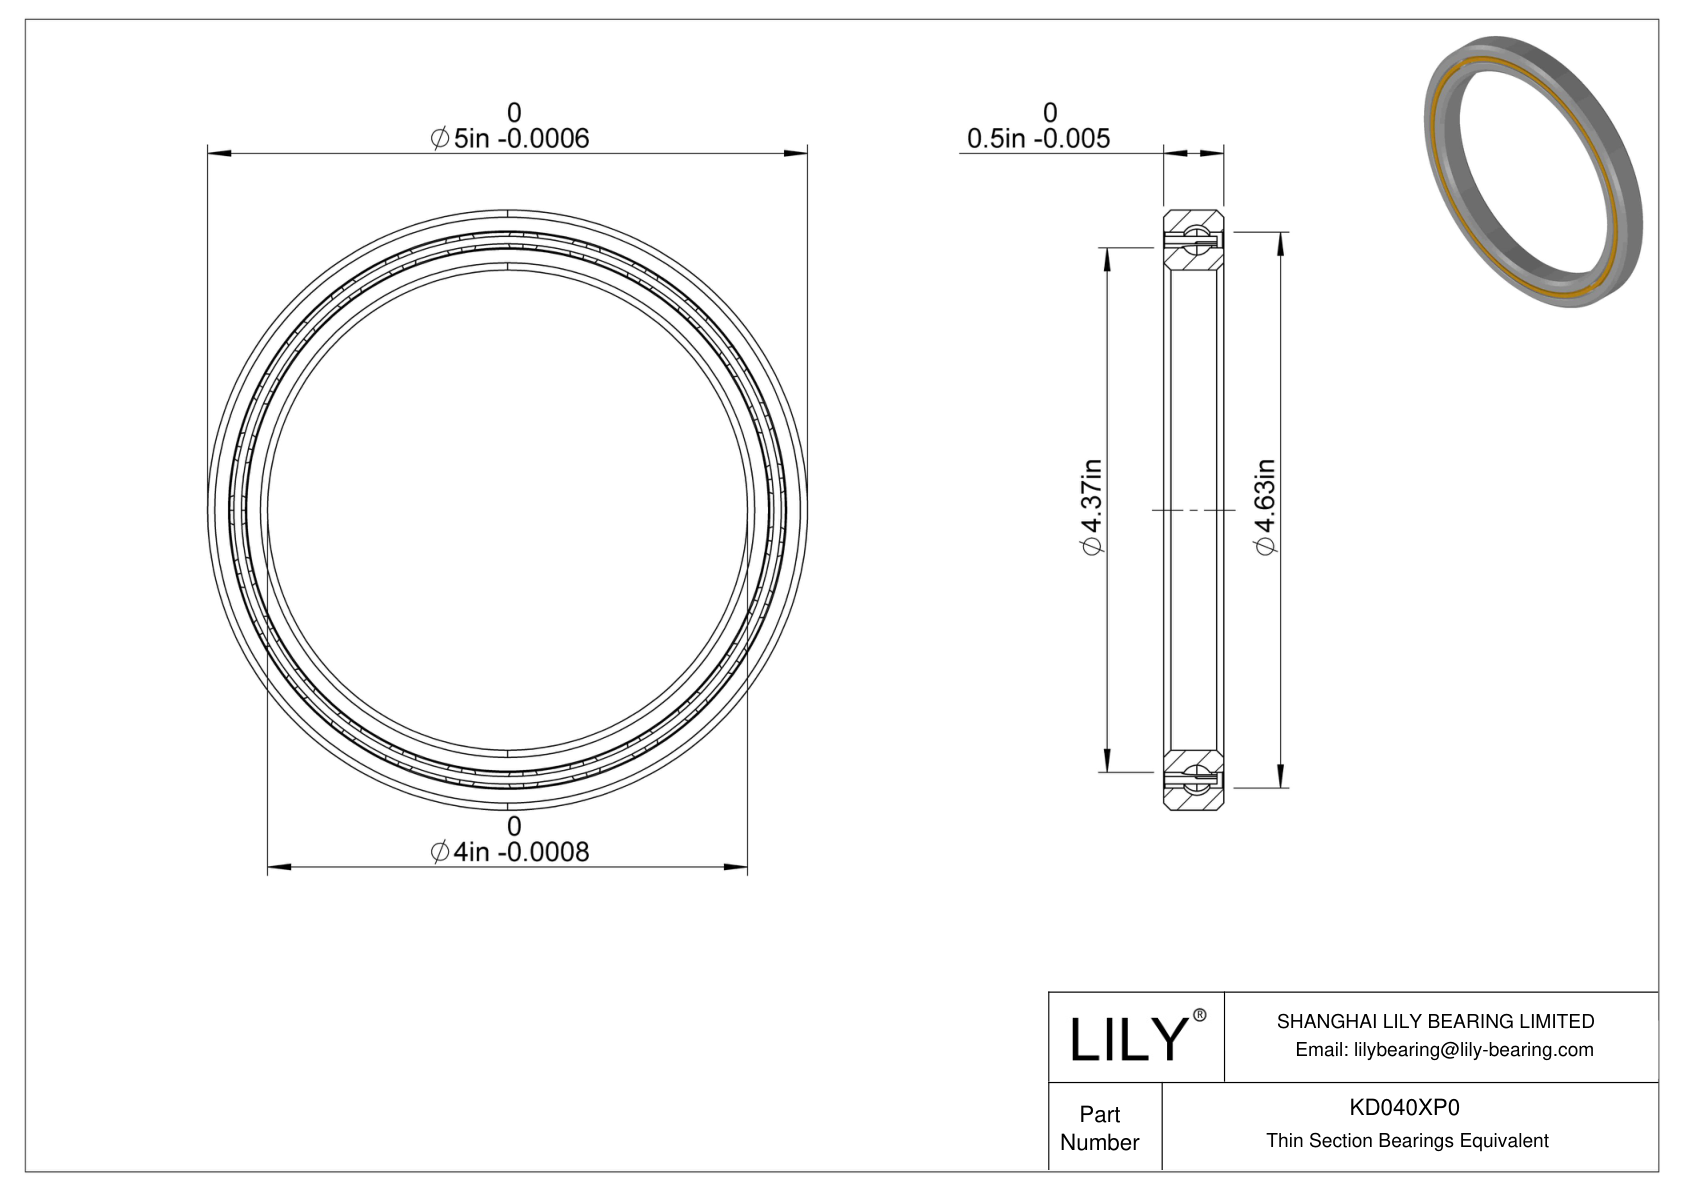 KD040XP0 Constant Section (CS) Bearings cad drawing